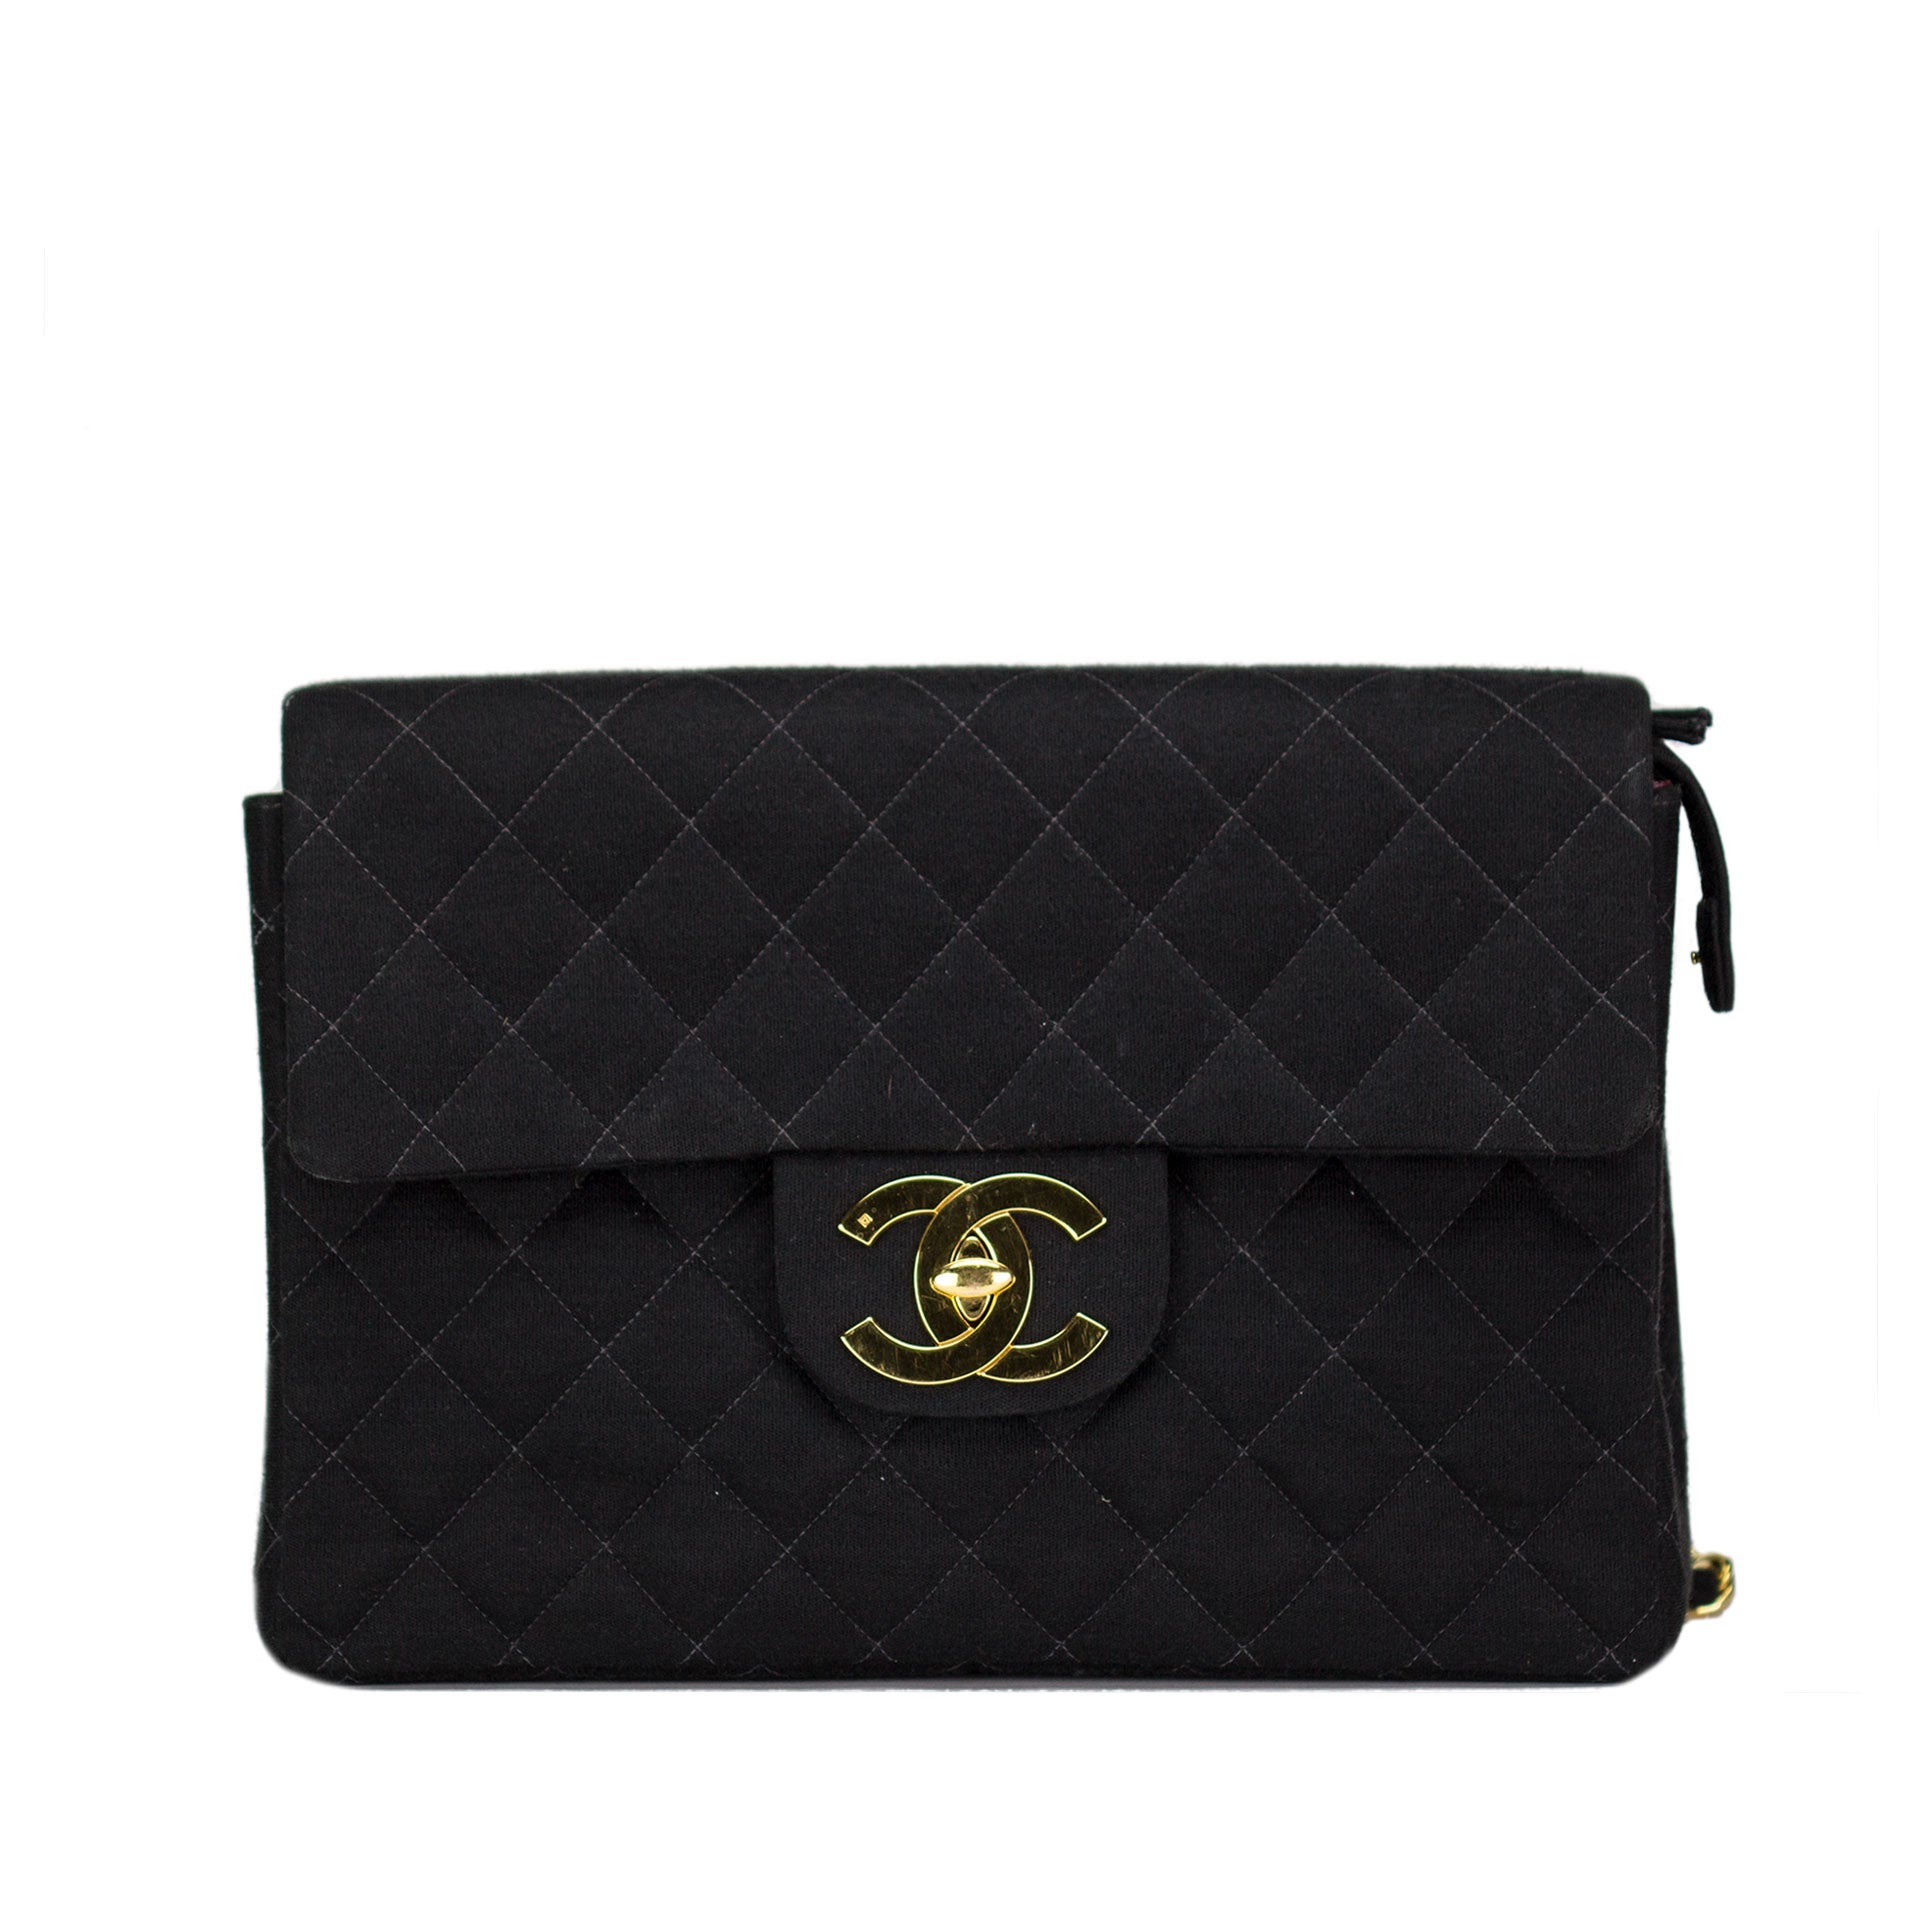 Chanel Canvas Quilted Cloth Jumbo Classic Flap Backpack